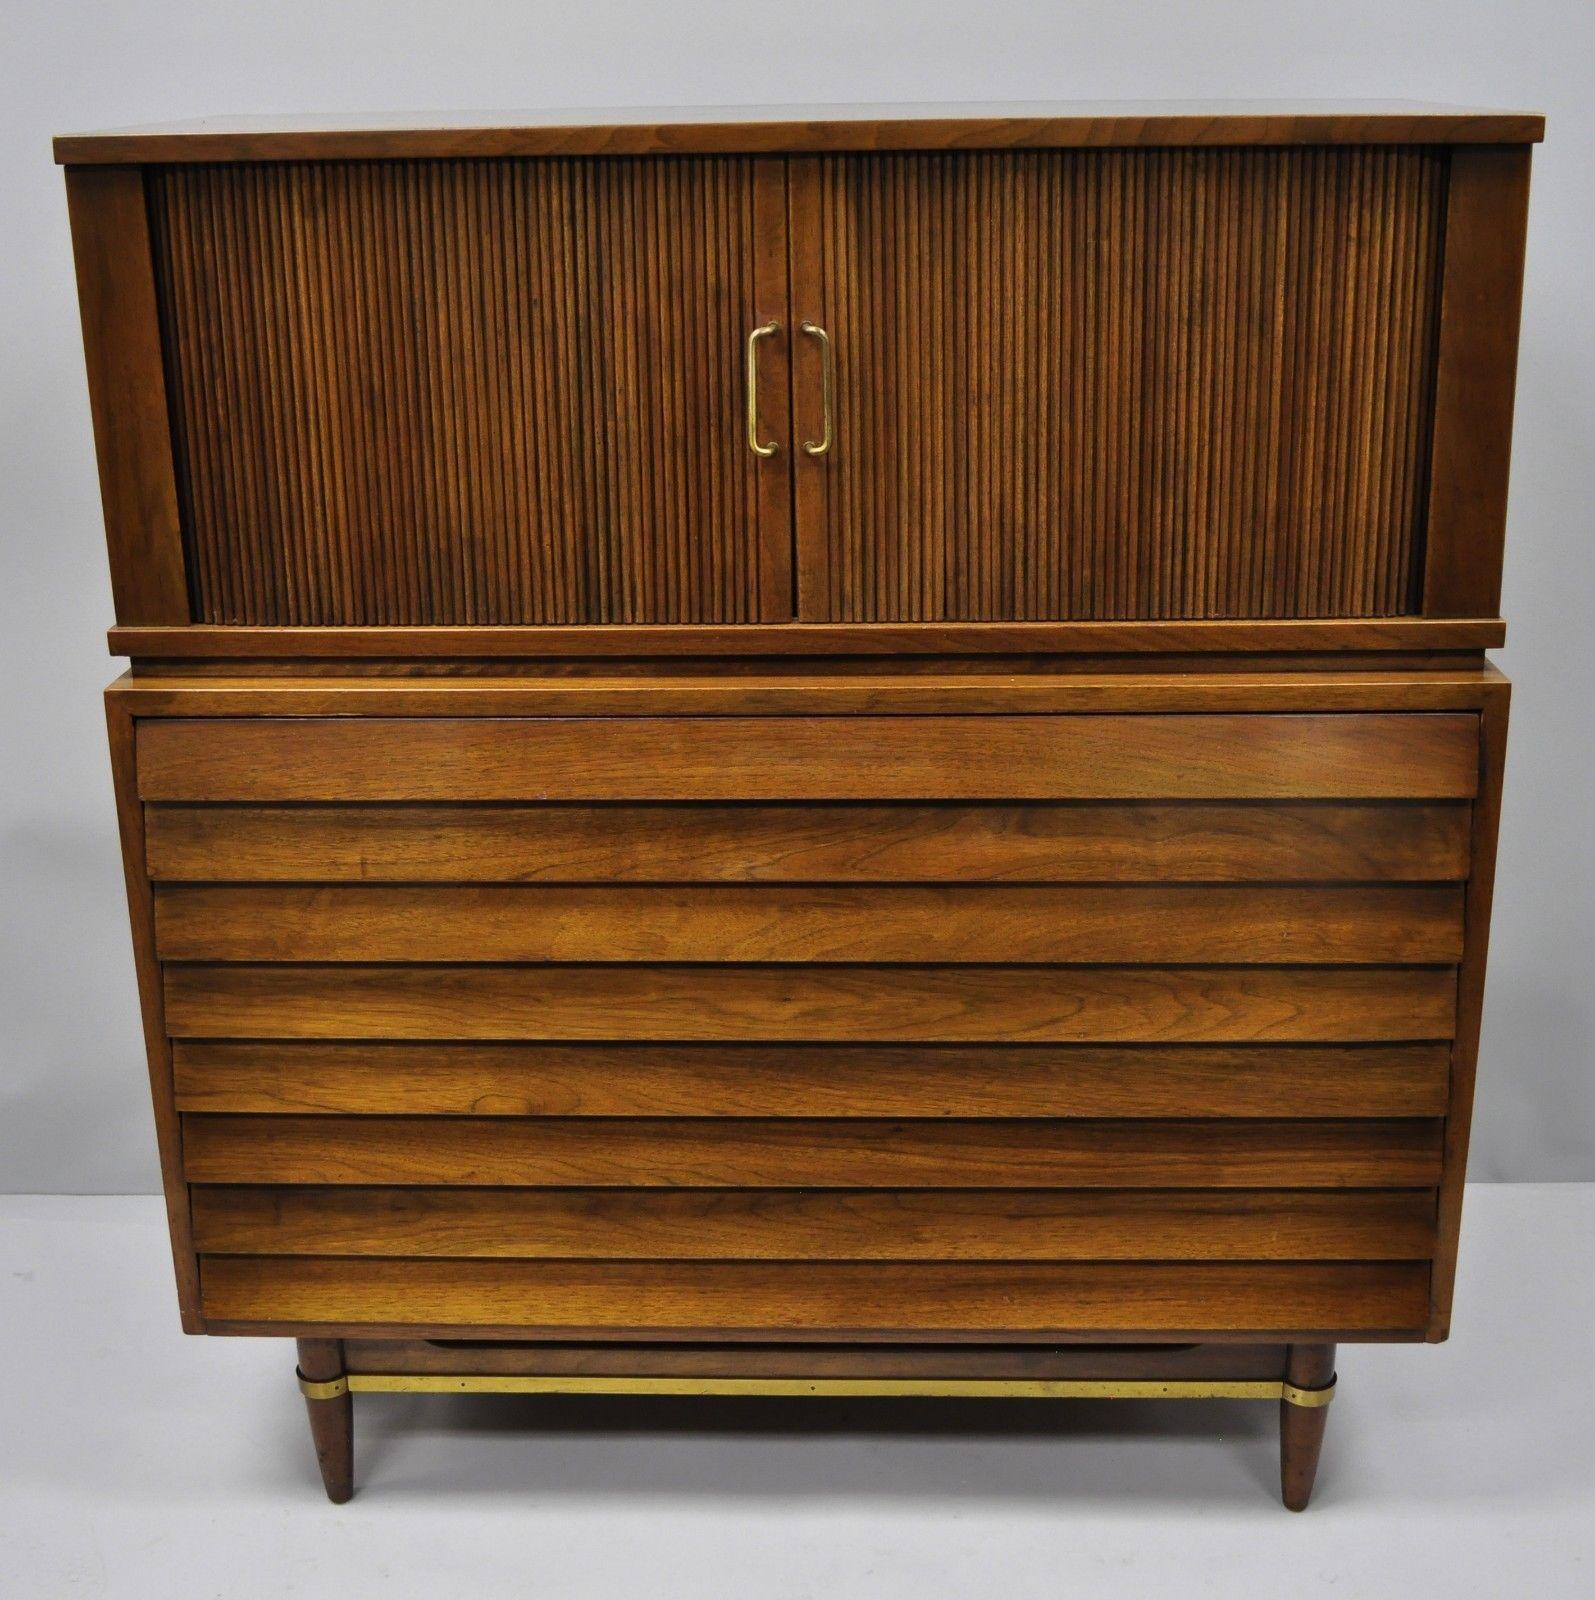 Mid-Century Modern walnut louvered drawers dresser by American of Martinsville. Item features two tambour sliding doors, brass stretcher accents, three louvered drawers, beautiful wood grain, serial number #4004-85, five dovetailed drawers, and